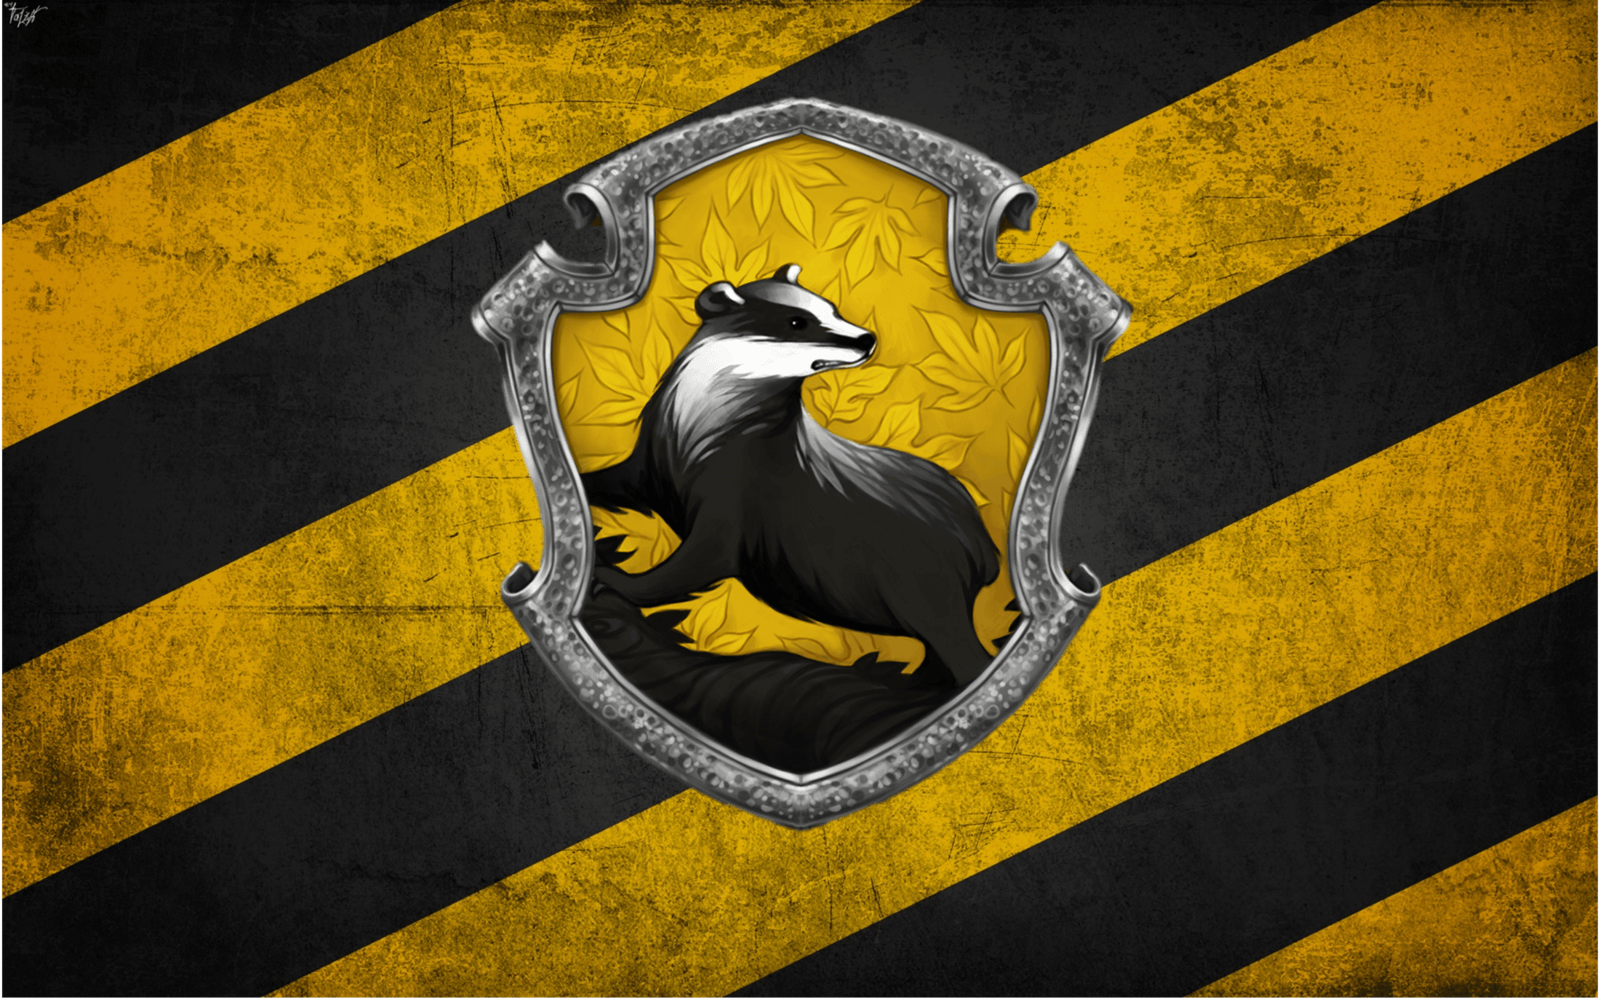 Hufflepuff Wallpapers 66 pictures